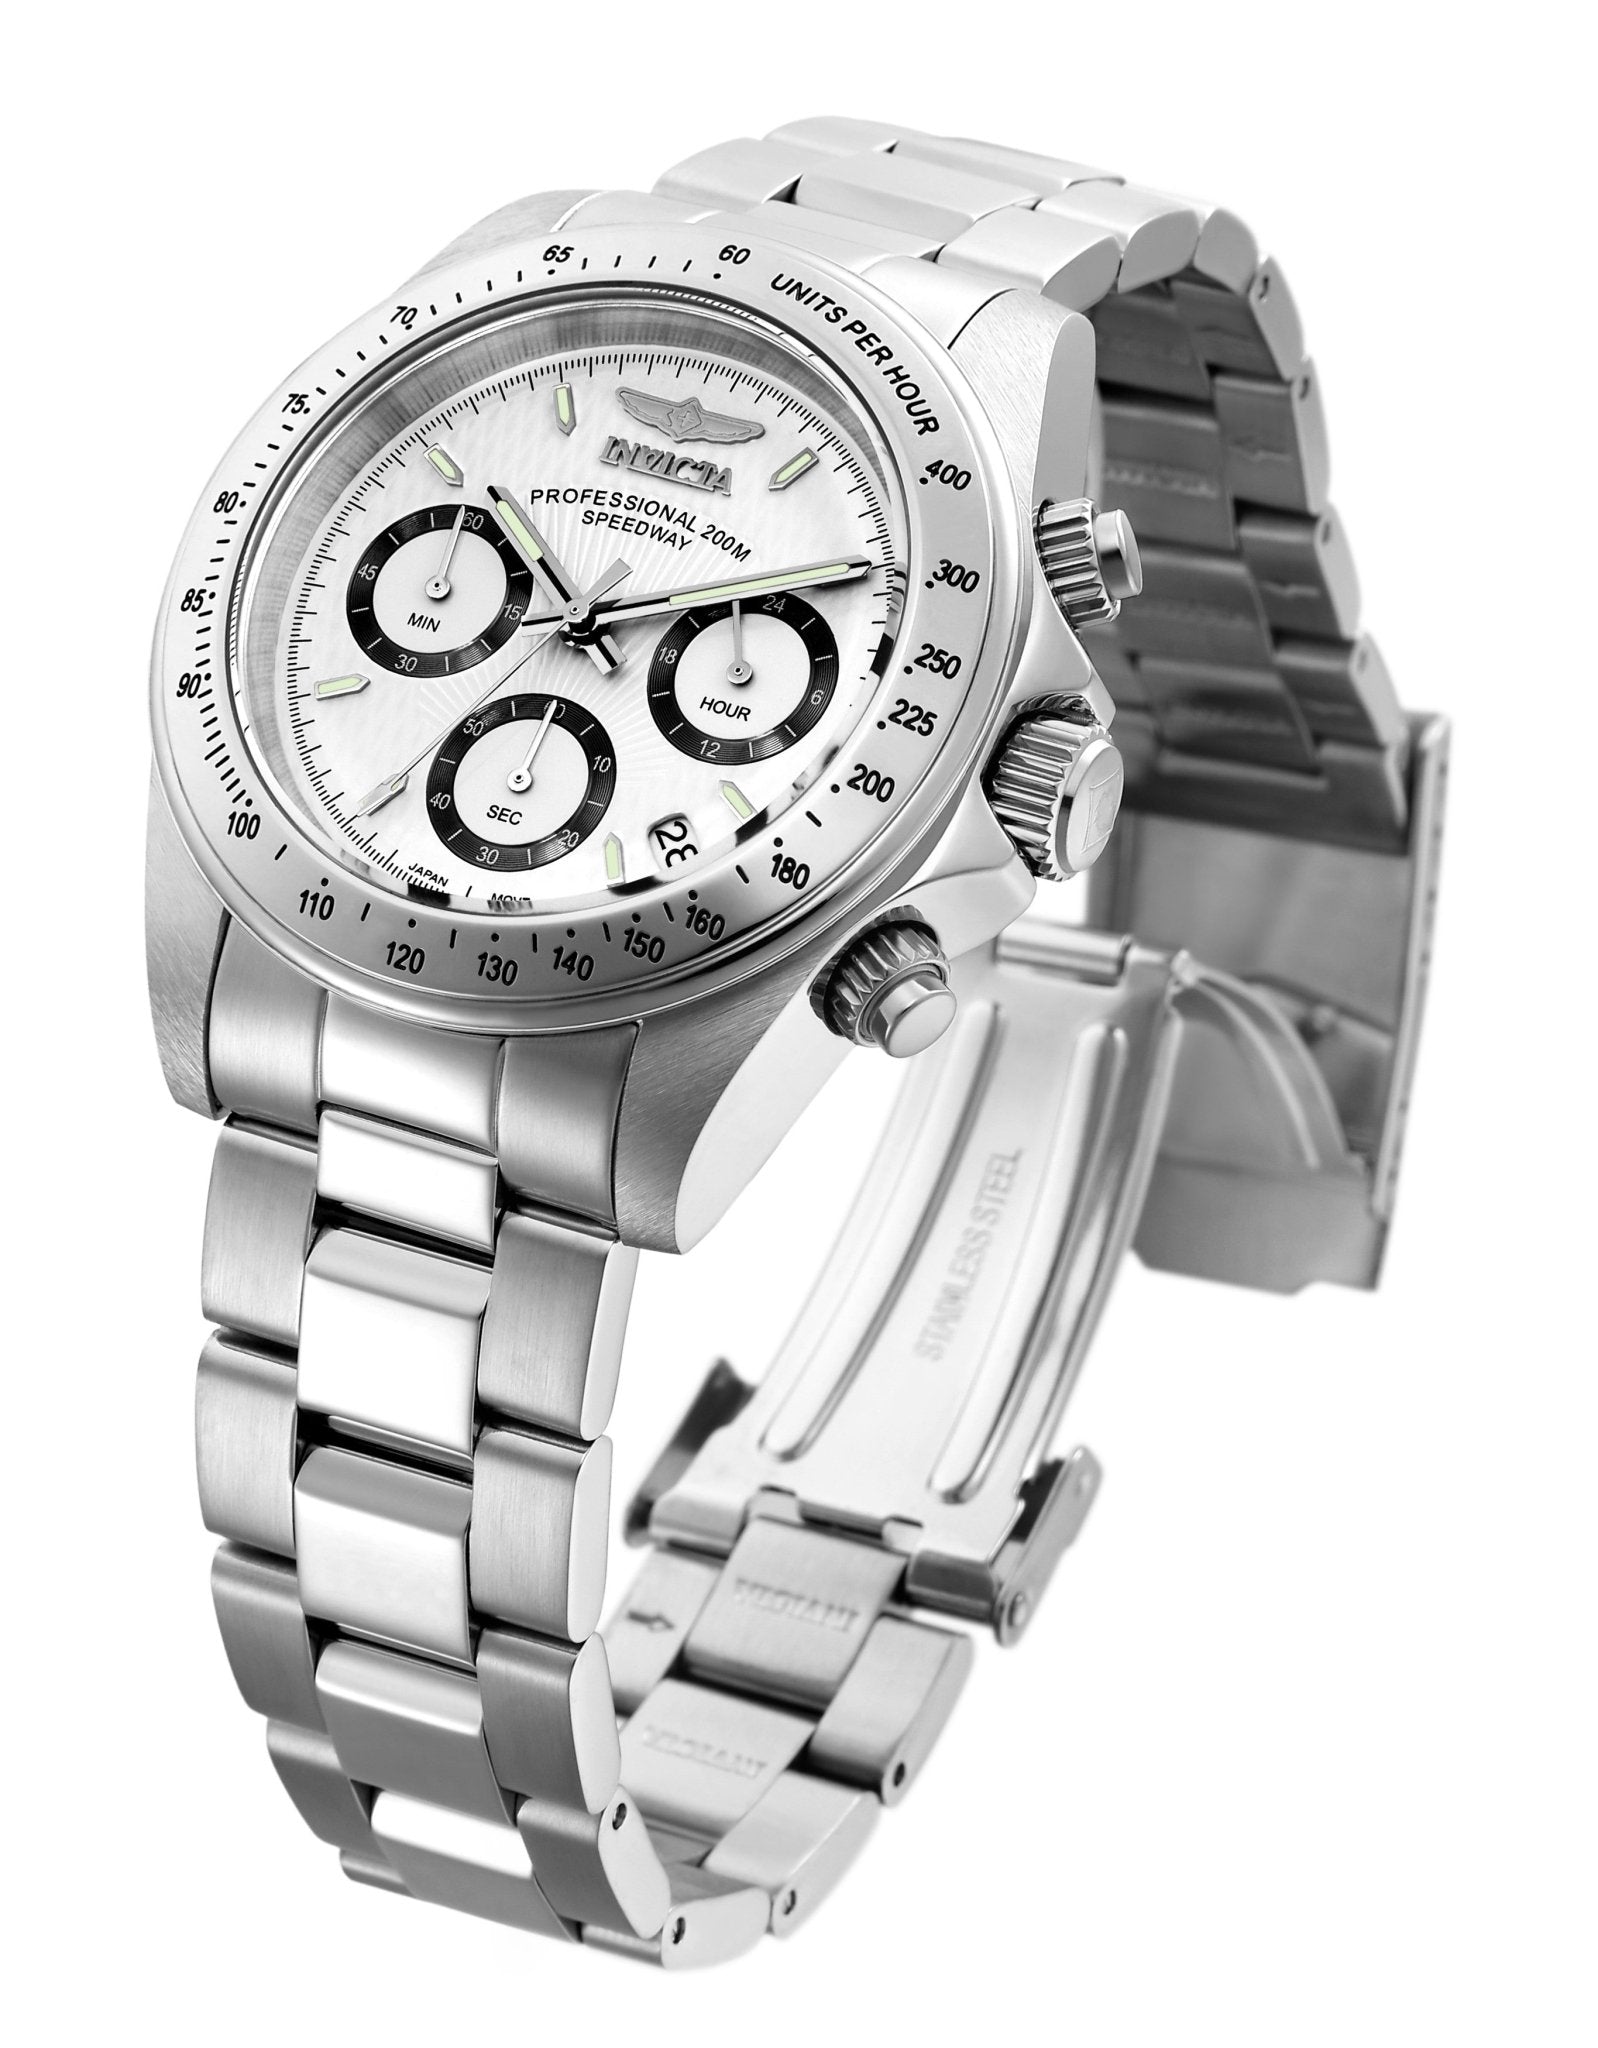 Invicta Speedway 9211 Men's Watch with black subdials on a silver stainless steel bracelet